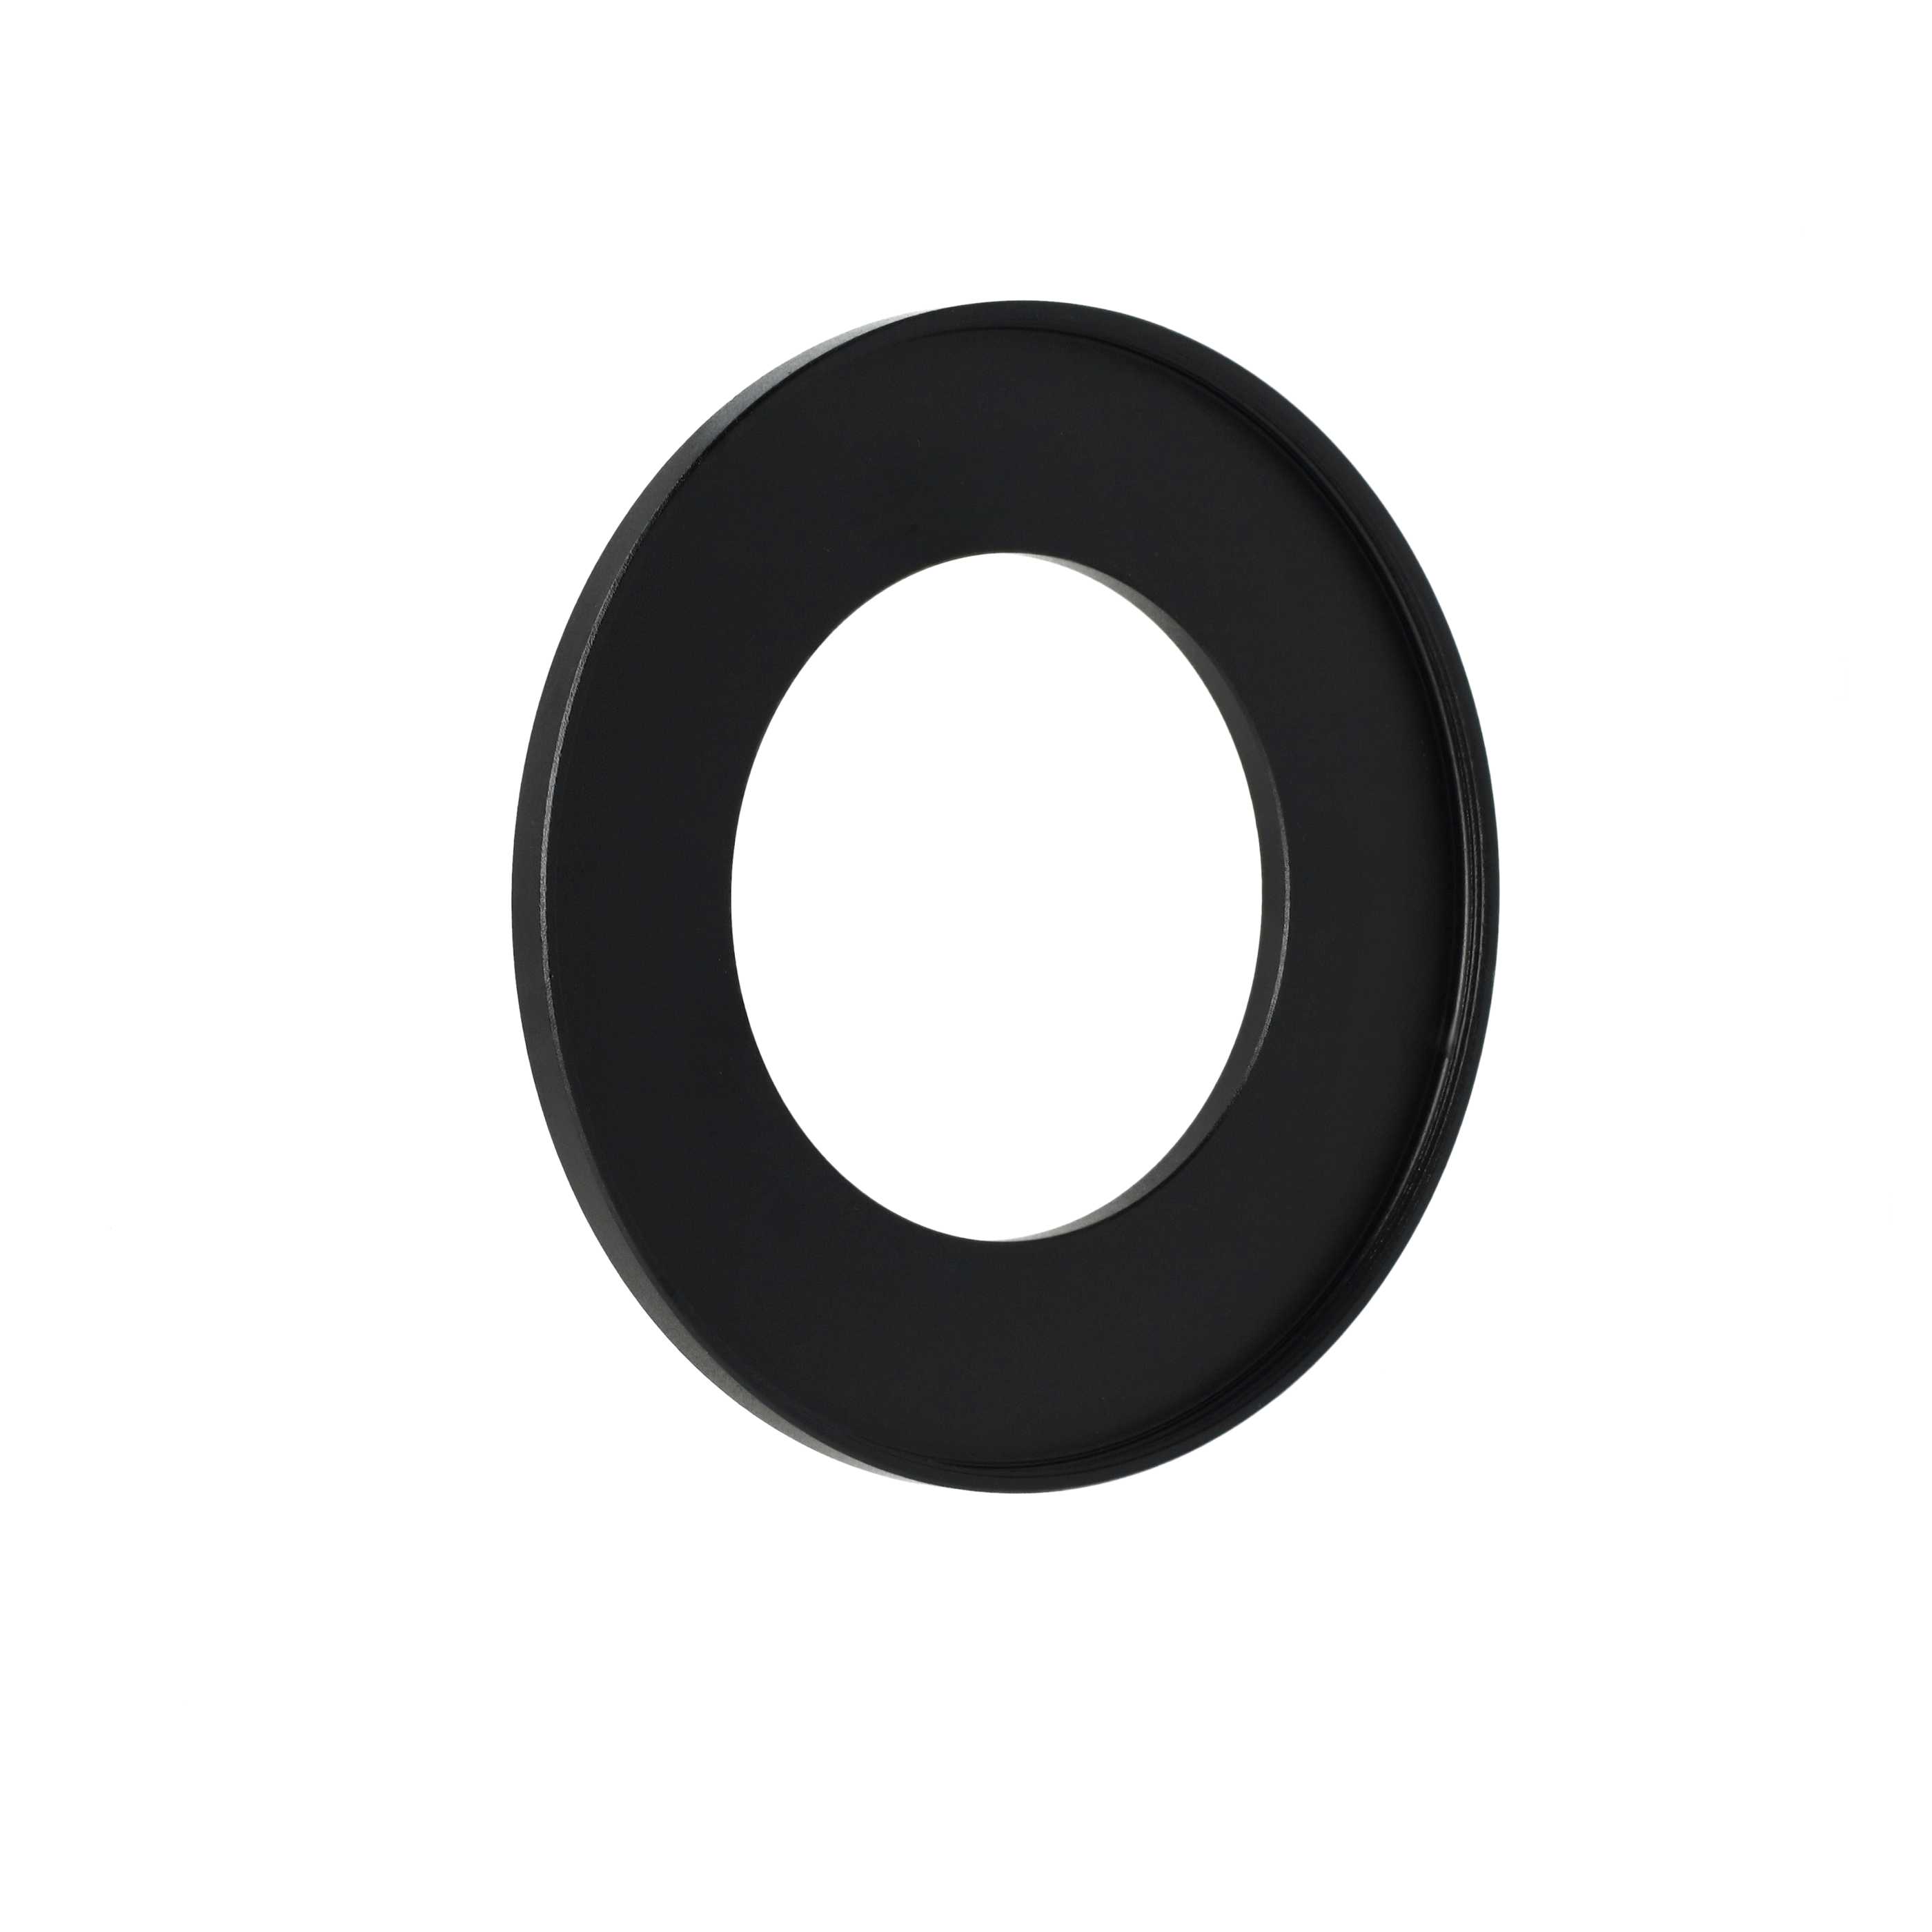 Step-Up Ring Adapter of 49 mm to 77 mmfor various Camera Lens - Filter Adapter